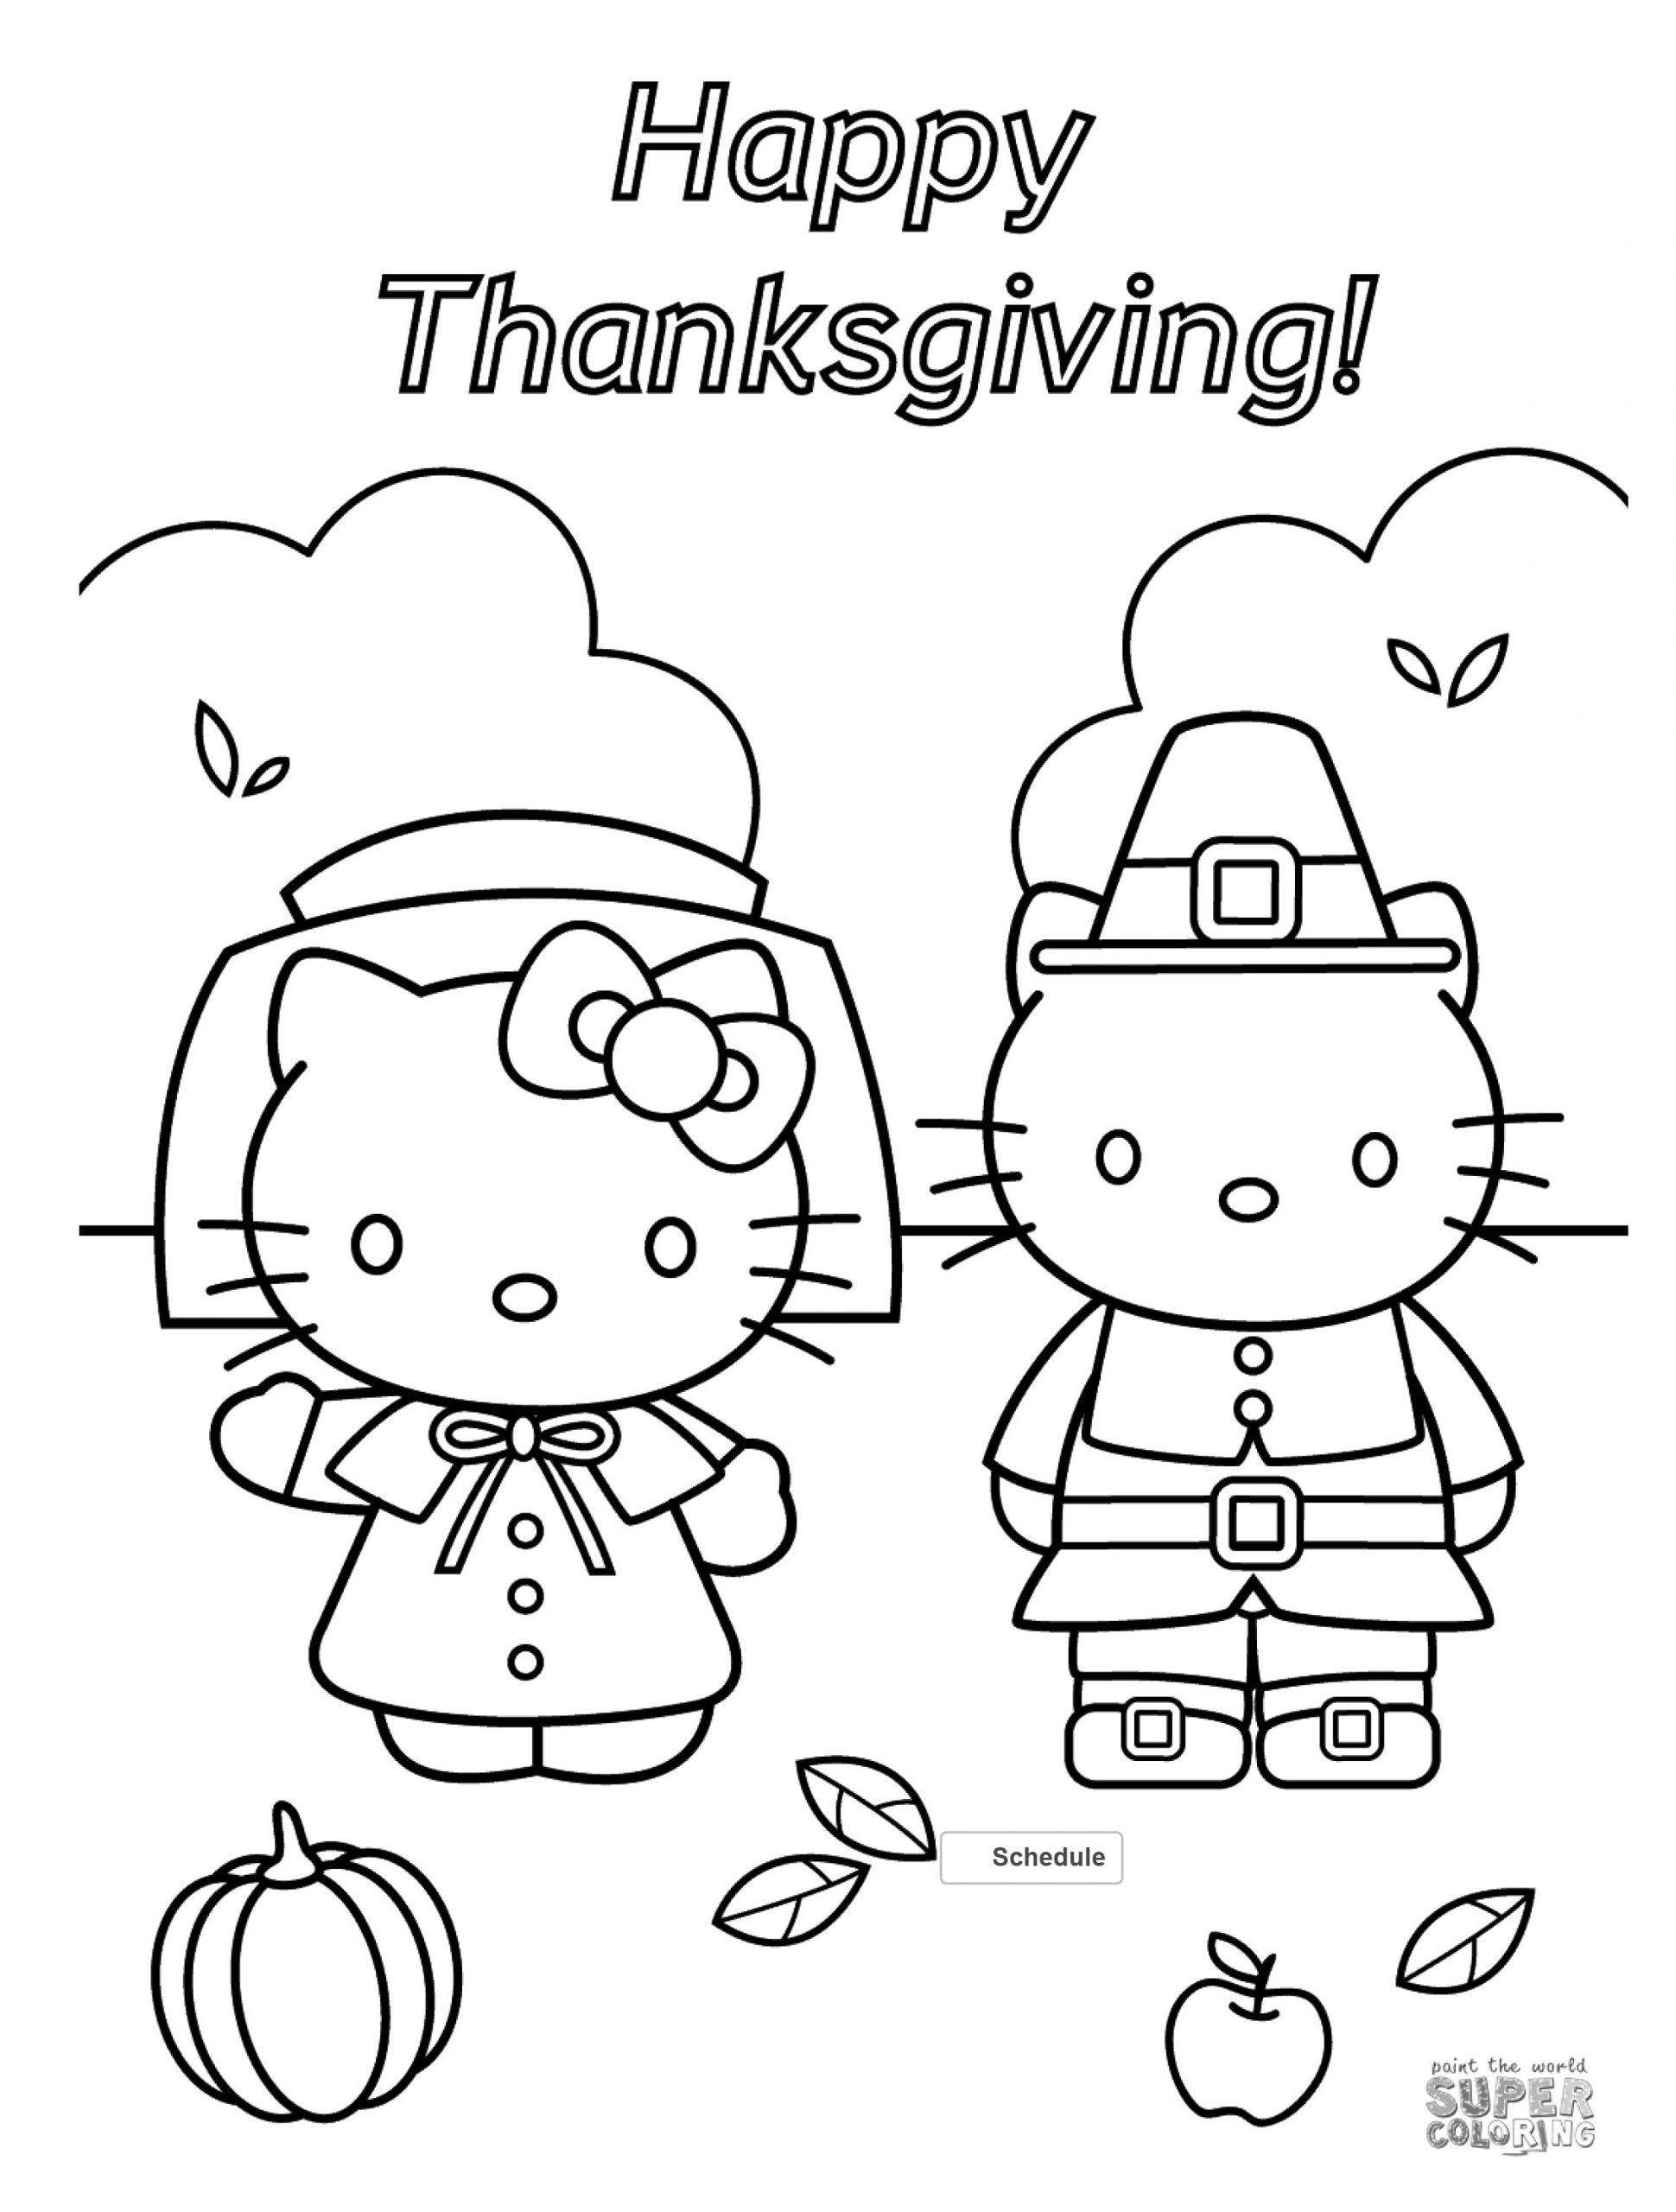 Free Printable Thanksgiving Coloring Pages
 FREE Thanksgiving Coloring Pages for Adults & Kids